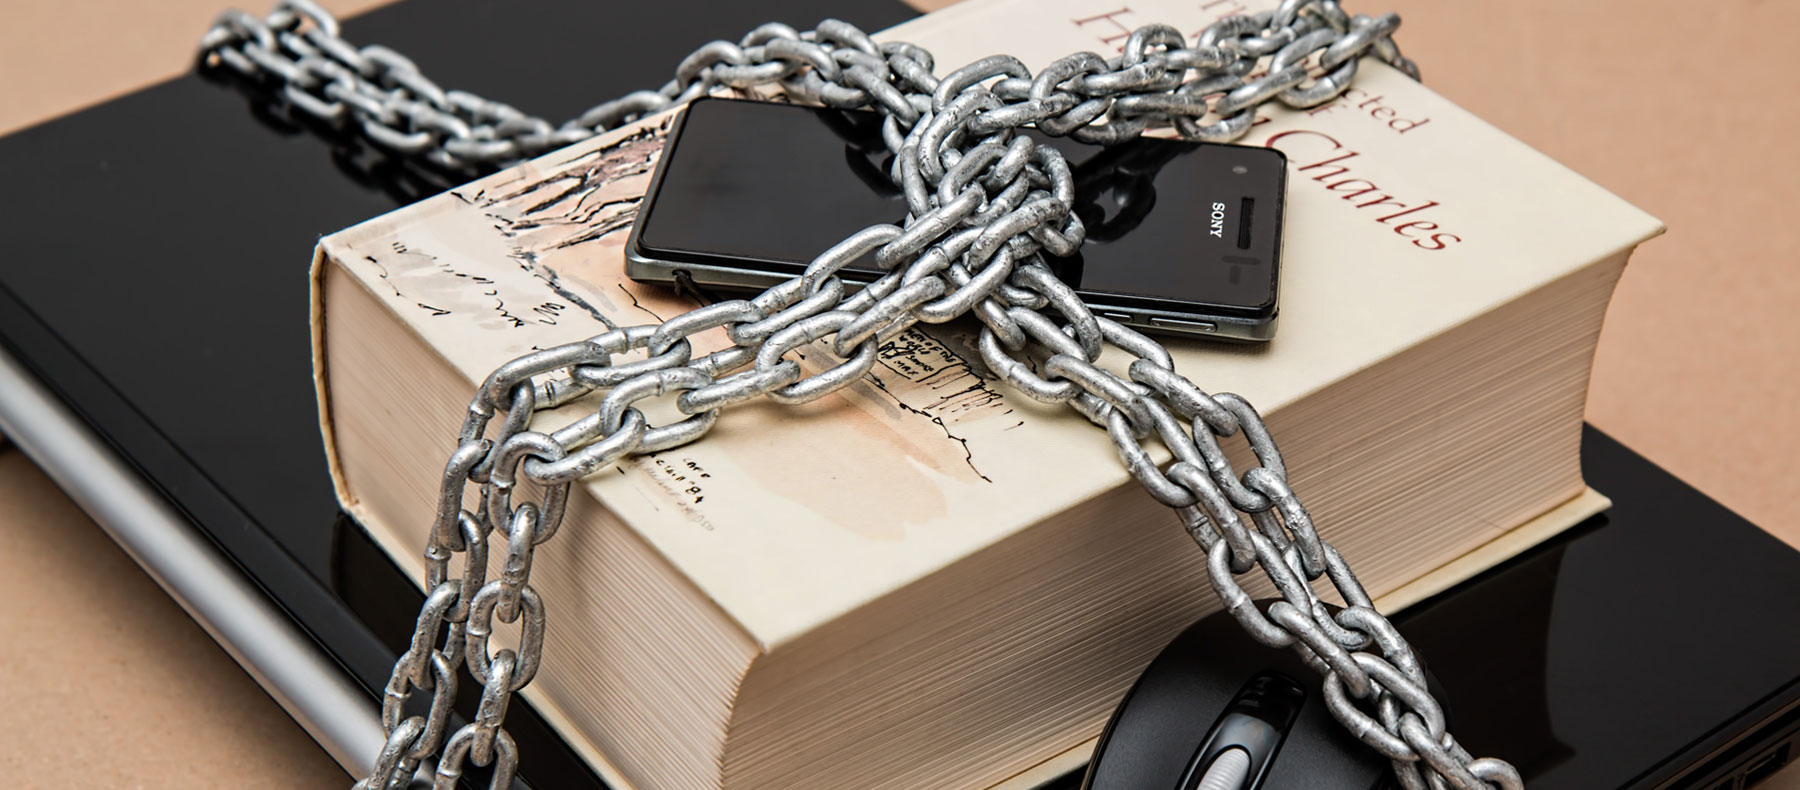 Chain ,inked around large book with cellphone on top